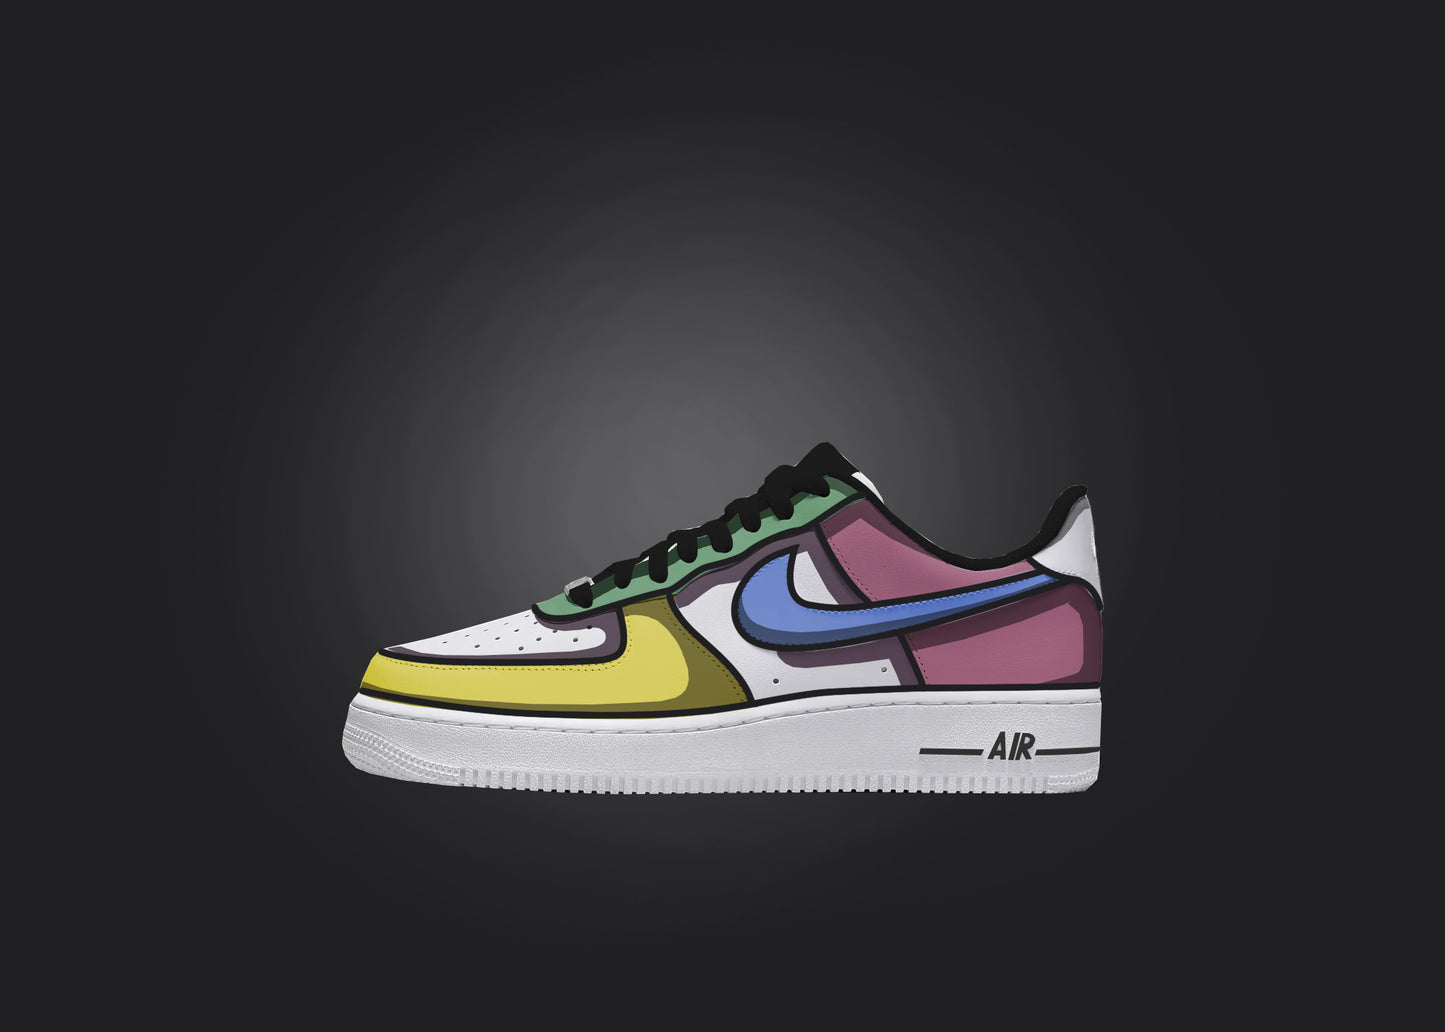 Custom Air Force 1 sneakers with multi-colored panels of yellow, green, blue, and pink, set against a black background.